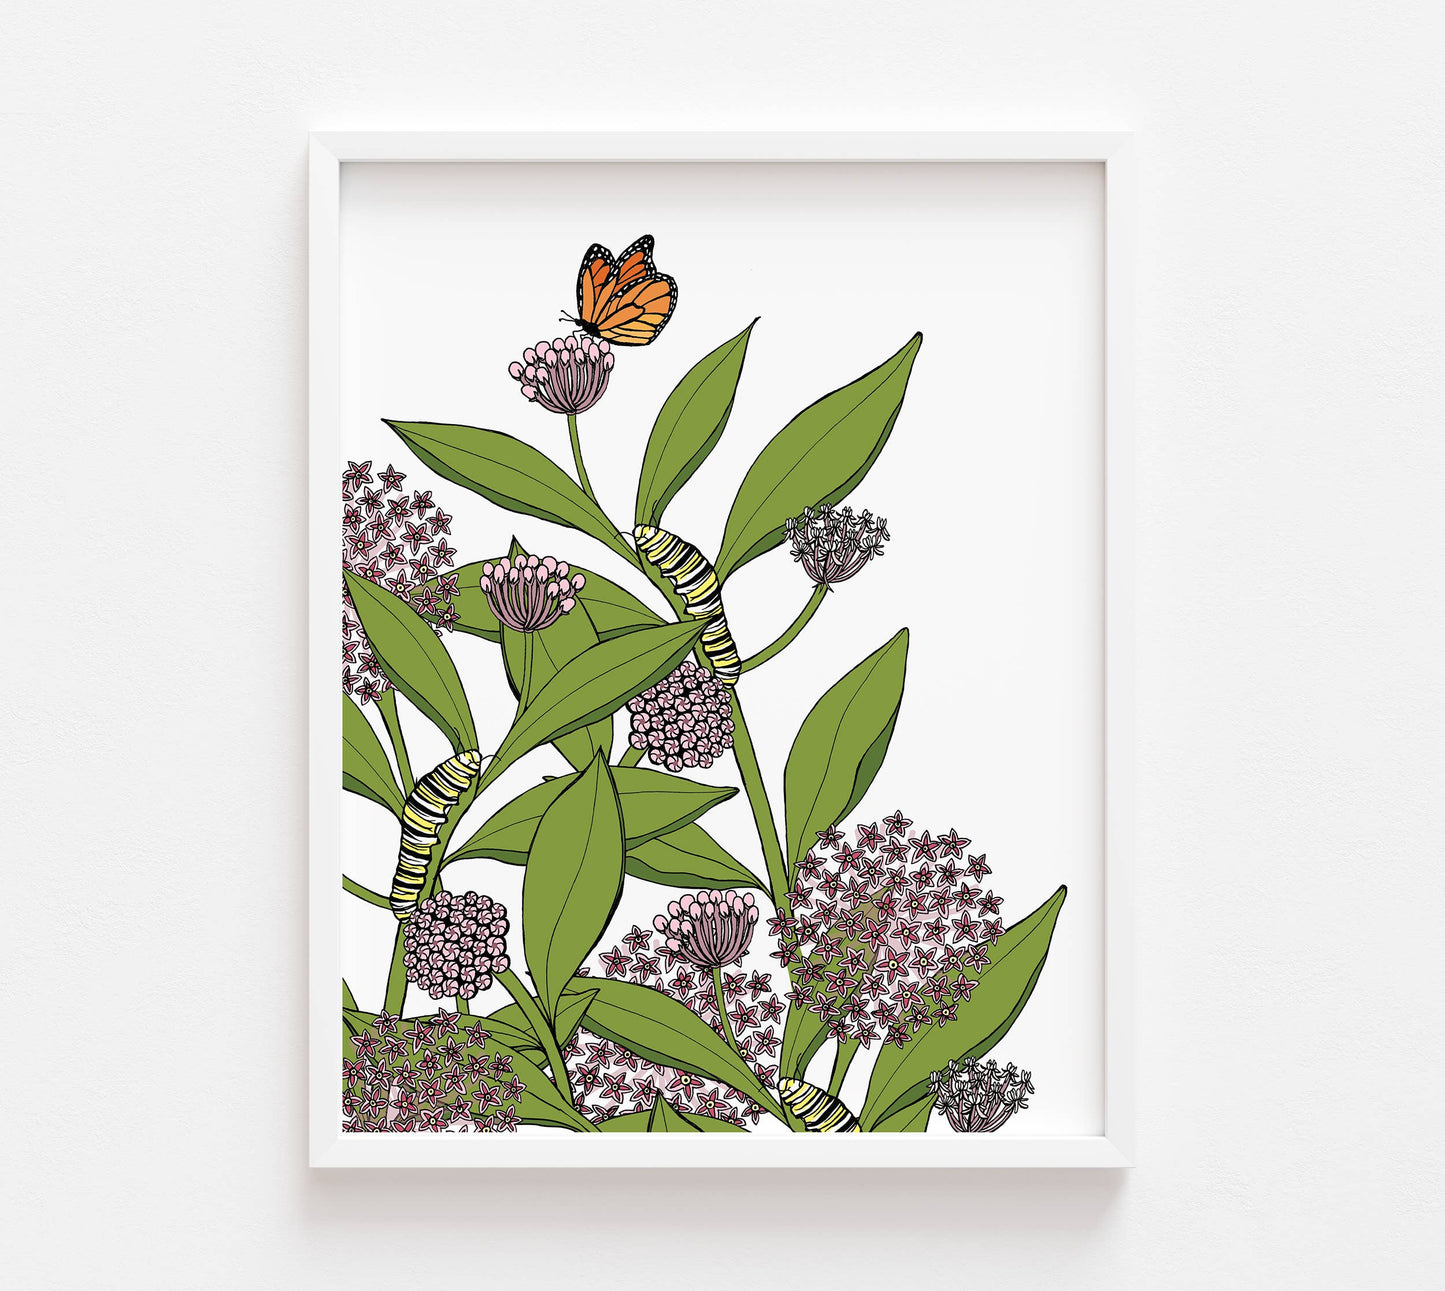 Milkweed and Monarch Butterfly Print